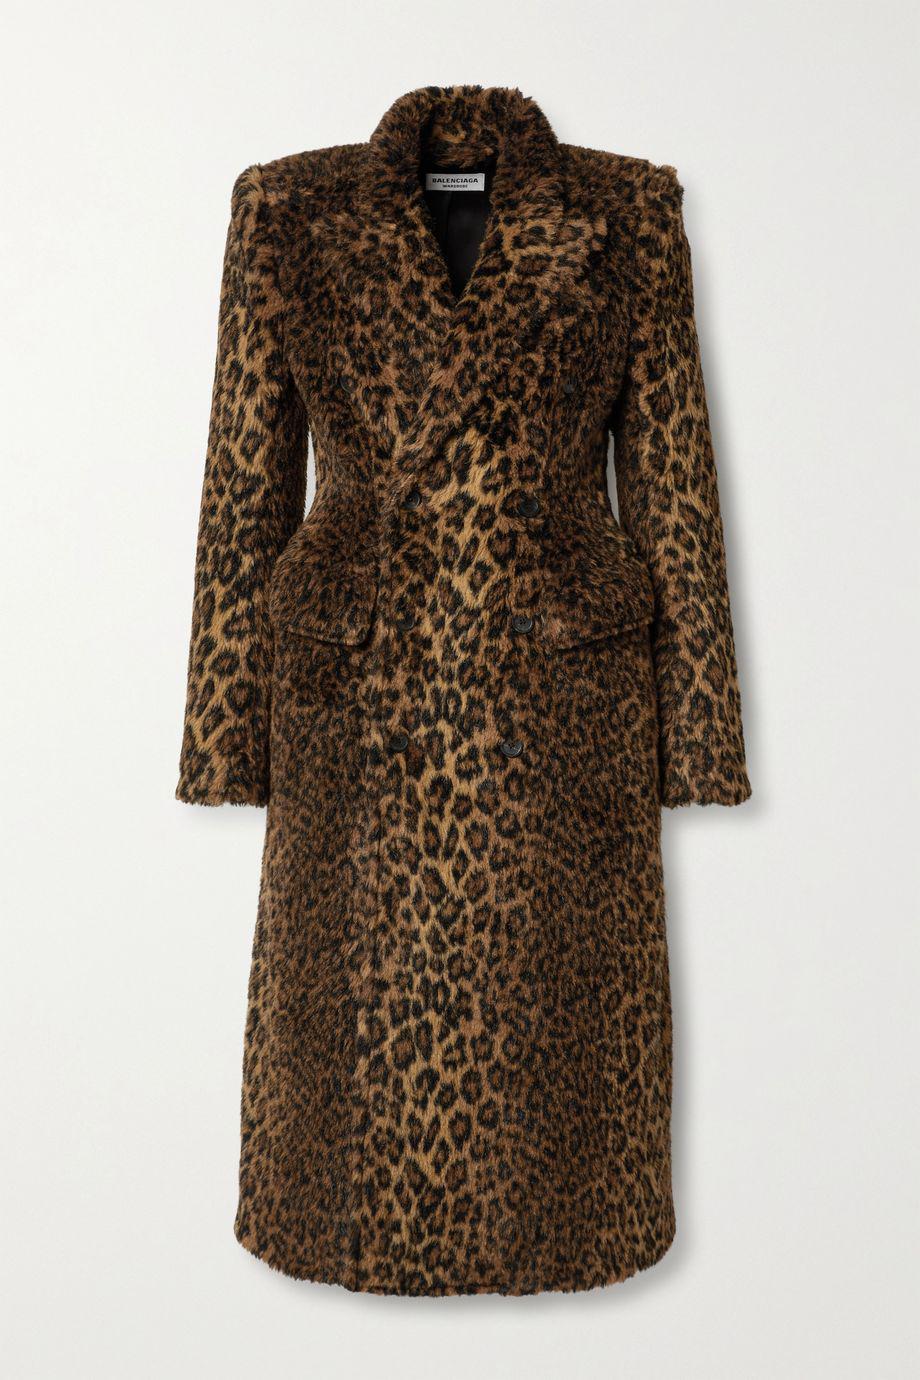 Hourglass double-breasted leopard-print faux fur coat by BALENCIAGA